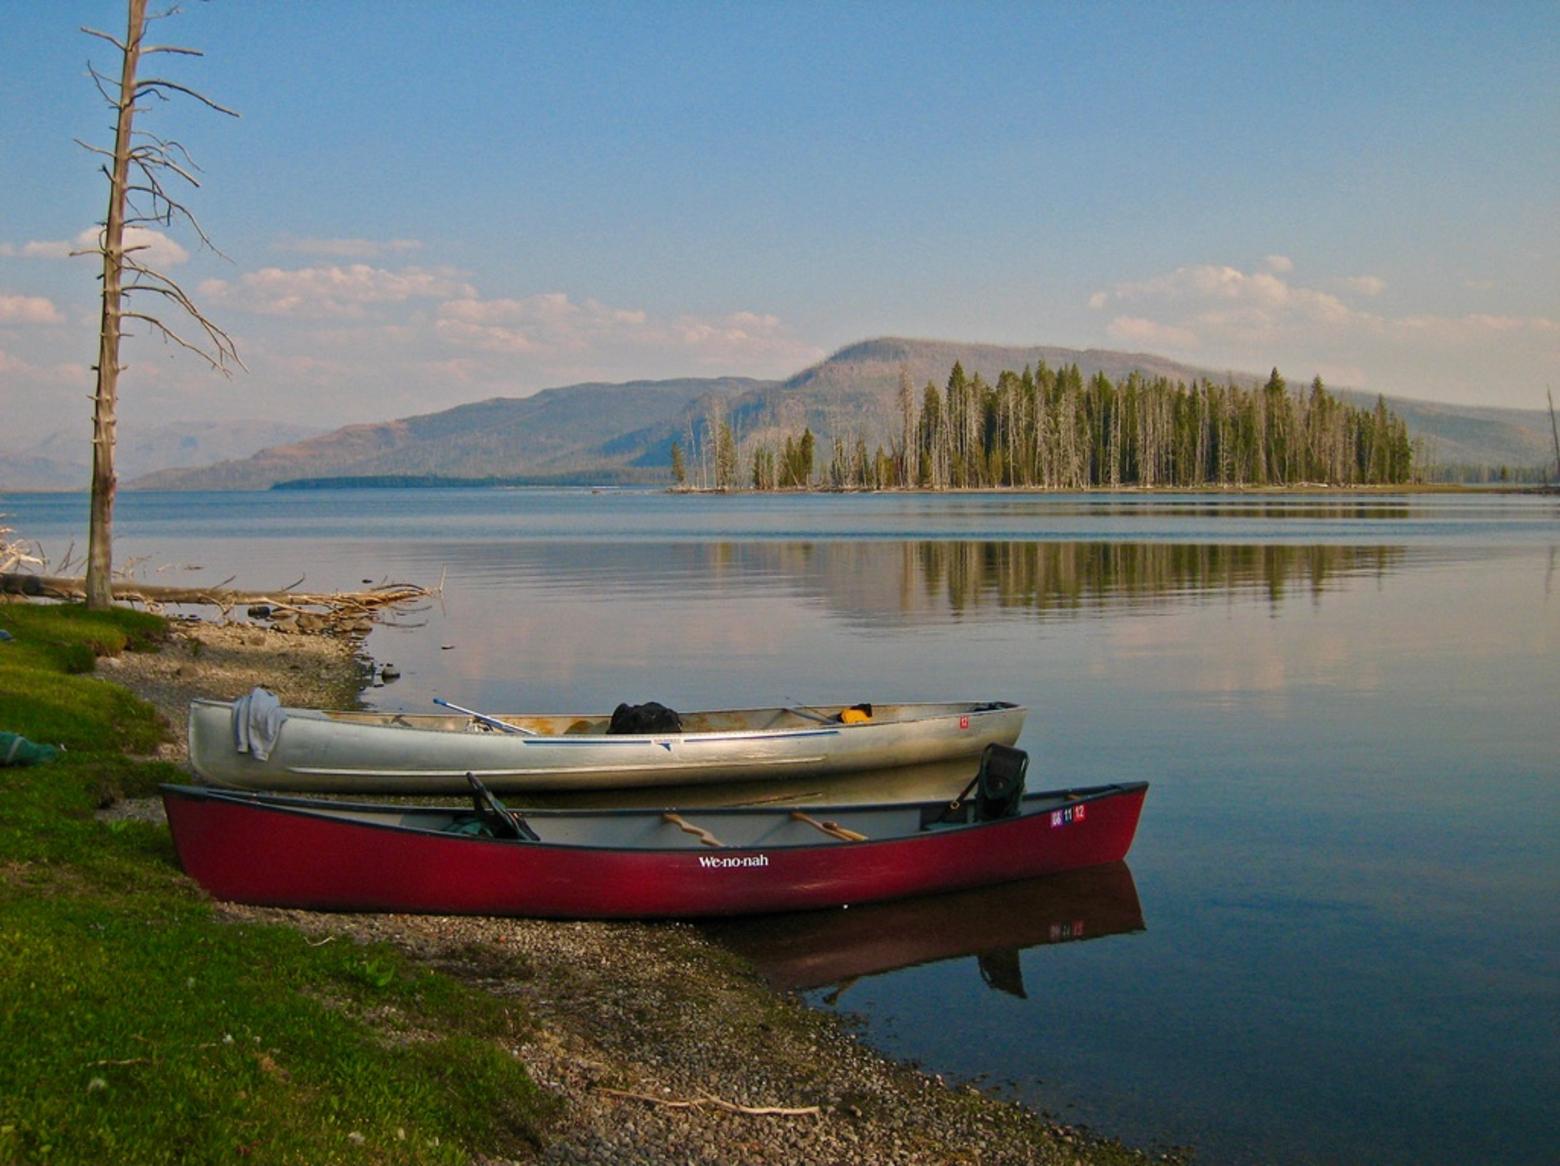 The southeast arm of Yellowstone Lake, one of the most remote wilderness corners of Yellowstone, is a place where motor boats are not allowed. Is it also a place that needs good cell phone reception?  Photo courtesy Jim Peaco/NPS